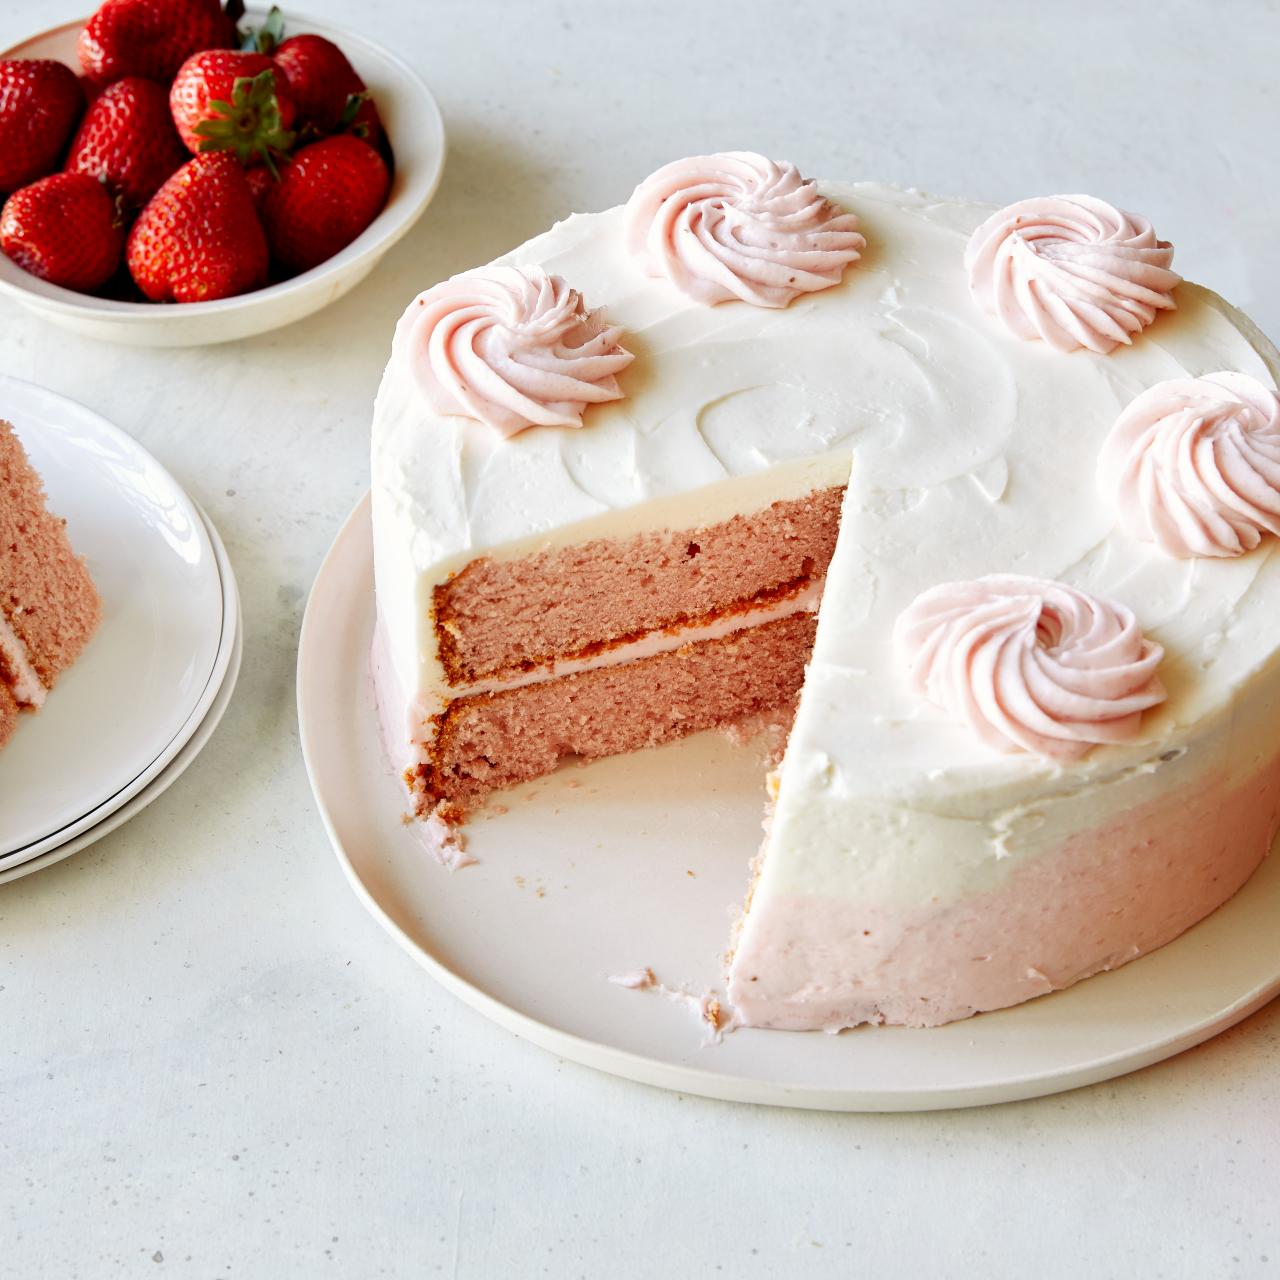 Strawberry Cake- An Easy & Delicious Homemade Treat!